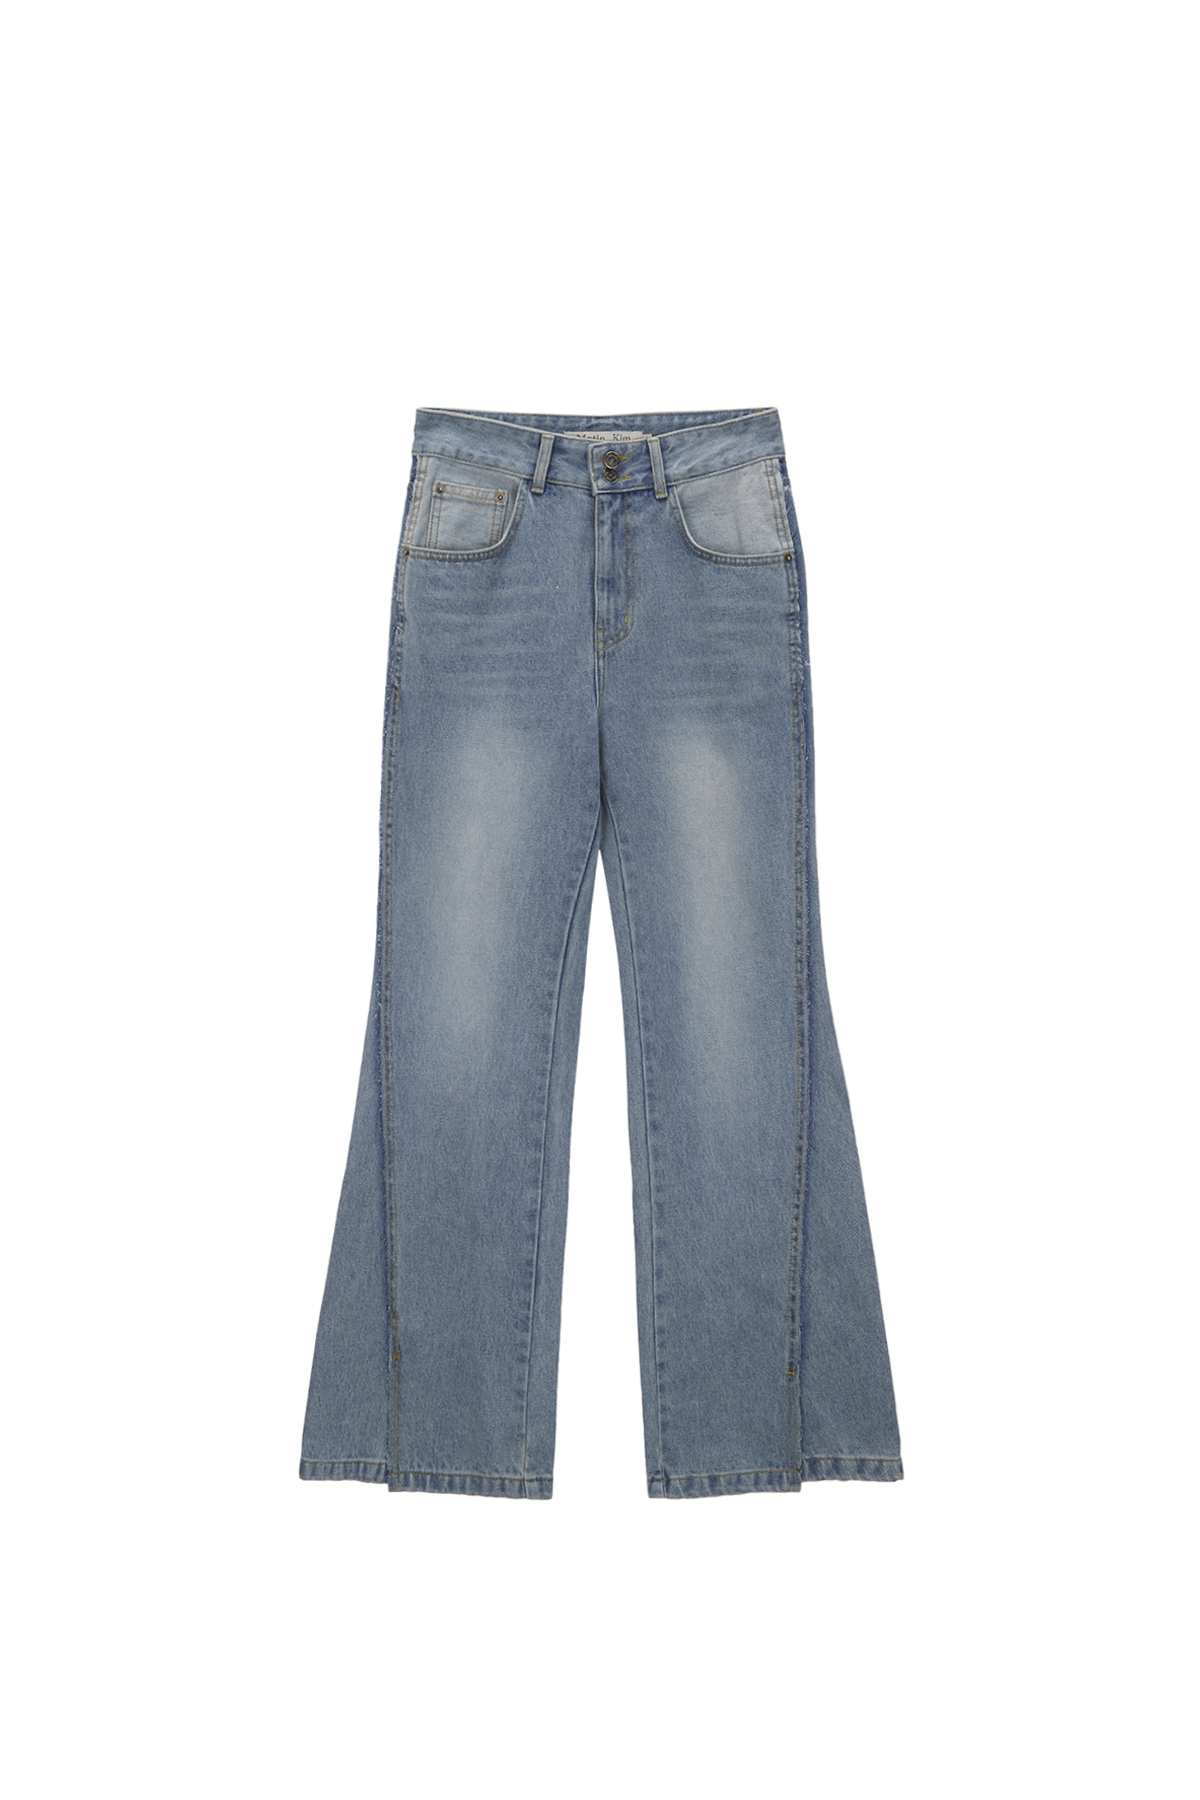 SLIT POINT WASHED BOOTS CUT DENIM PANTS IN BLUE